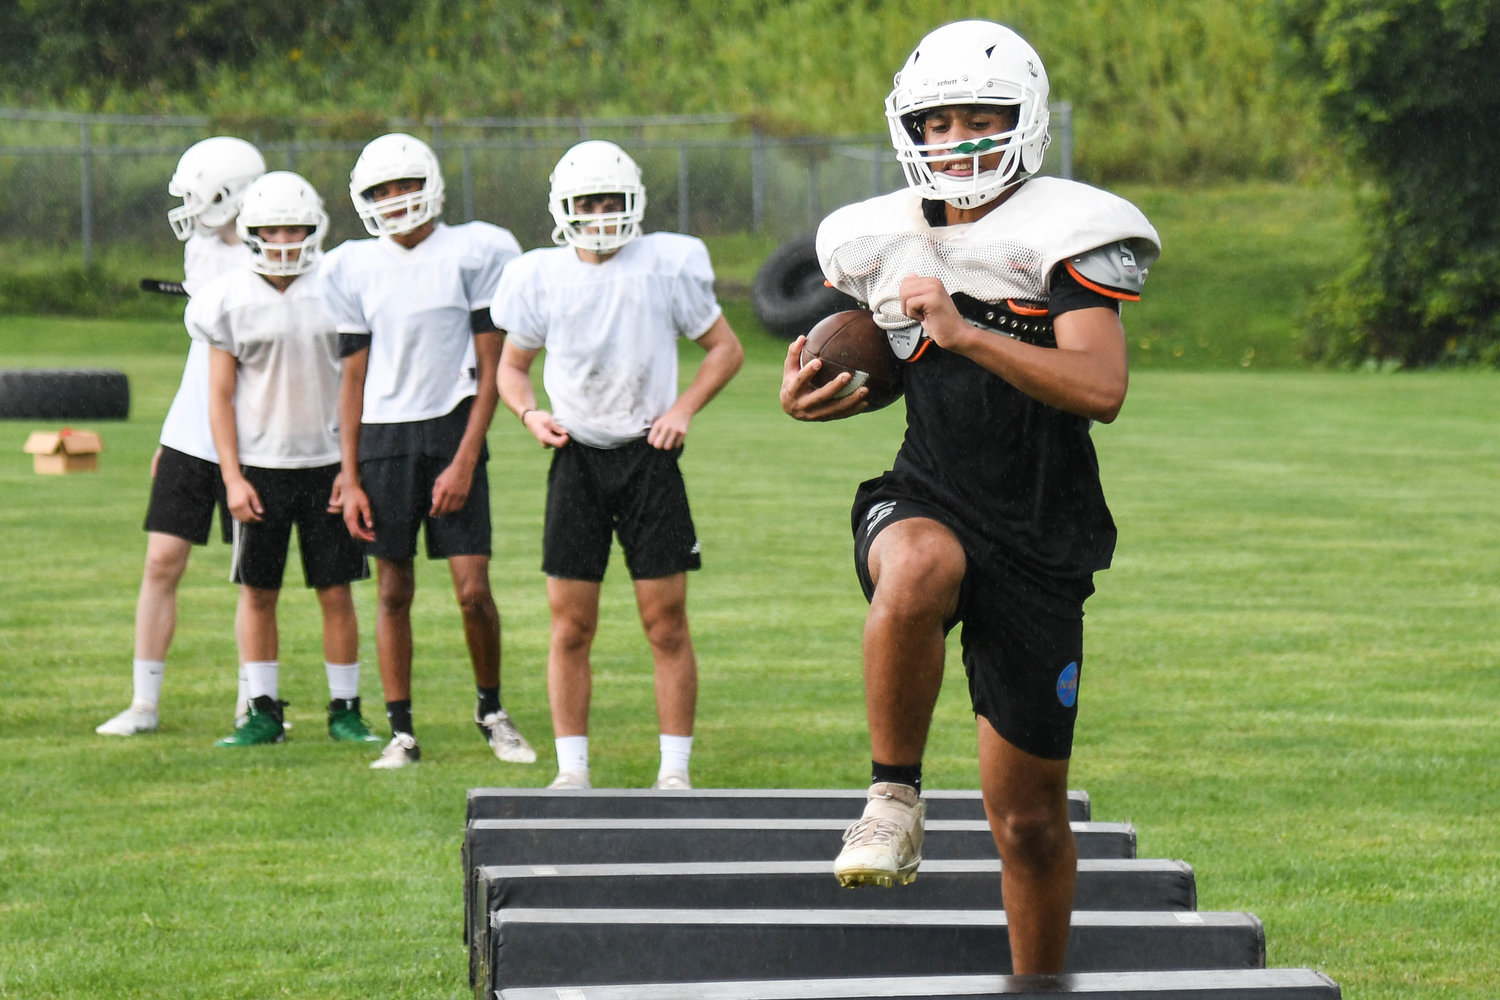 Herkimer running back Emmanuel Johnson works on speed drills during practice. Johnson is among the options in the backfield for Herkimer.